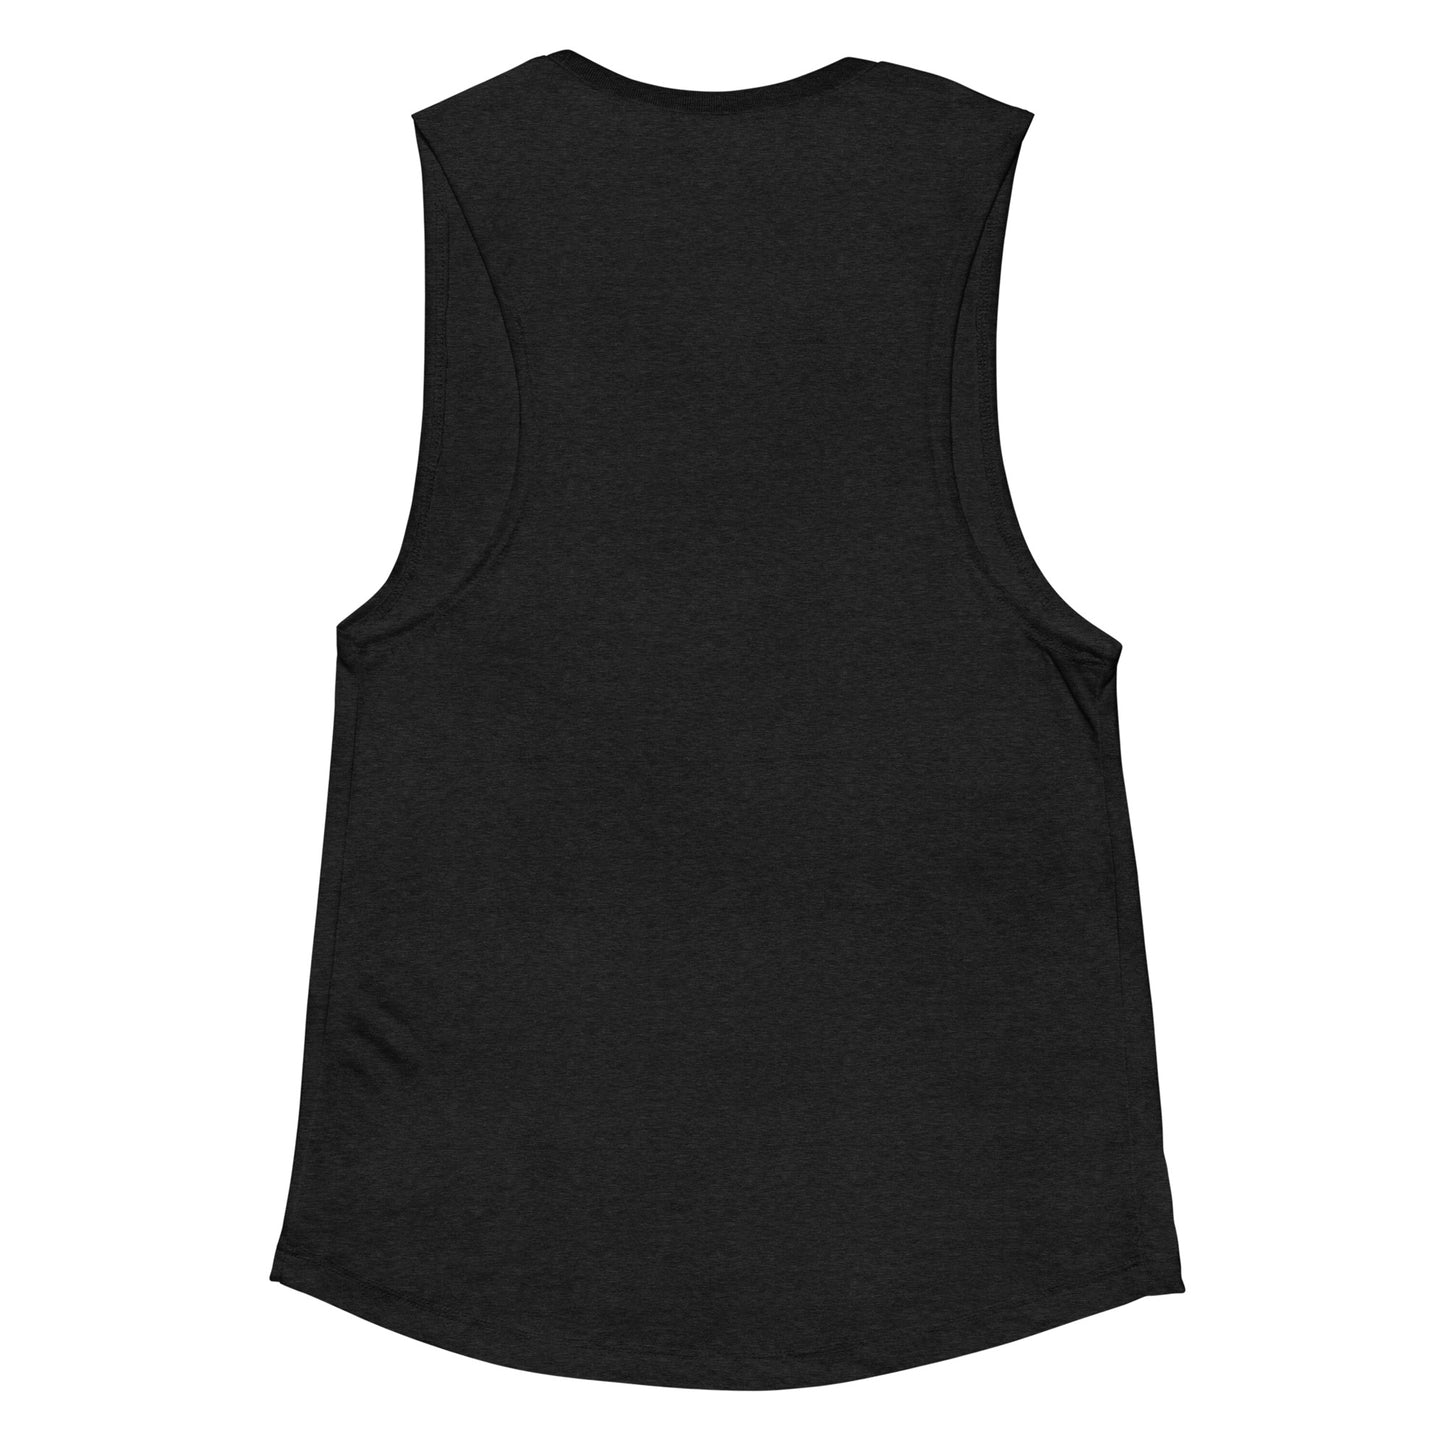 Hidden Geek Tarot Card Ladies’ Muscle TankThis comfortable muscle tank is soft and flowy with low cut armholes for a relaxed look.

• 65% polyester, 35% viscose
• Athletic Heather is 52% polyester, 48% viscoWitchin Waifu